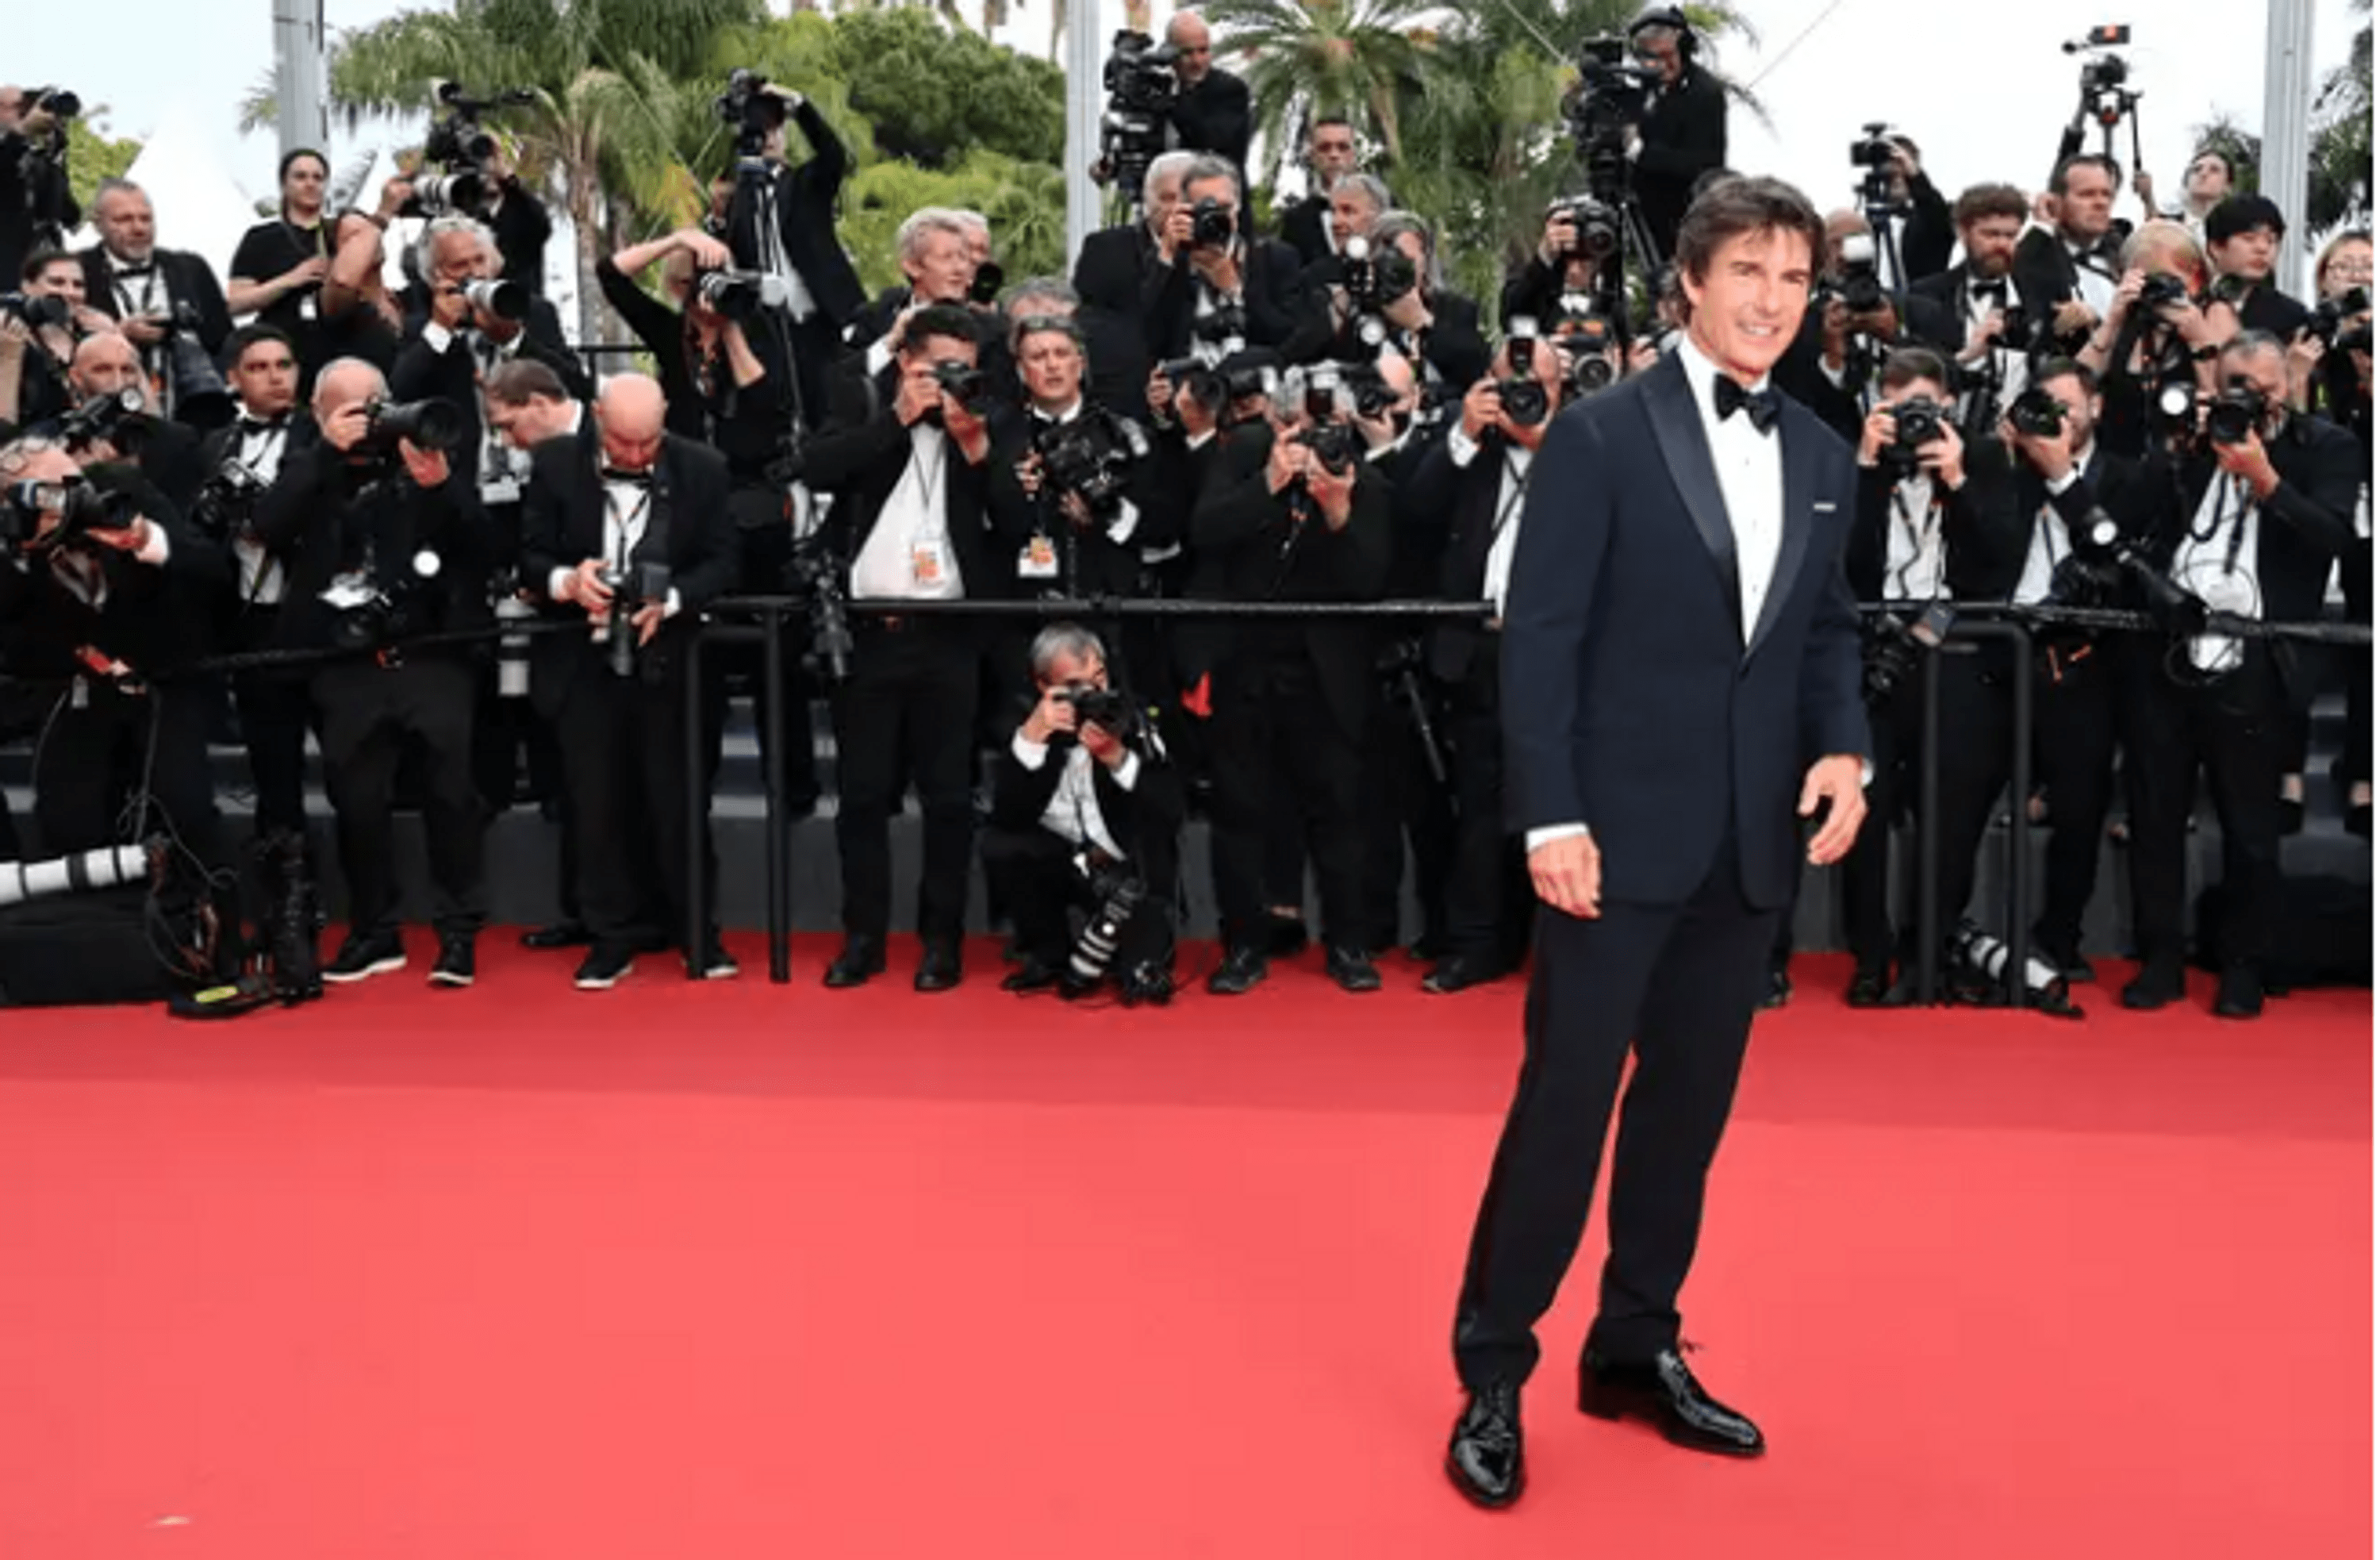 The red carpet of the premiere of 'Top Gun: Maverick' at the Cannes Film Festival